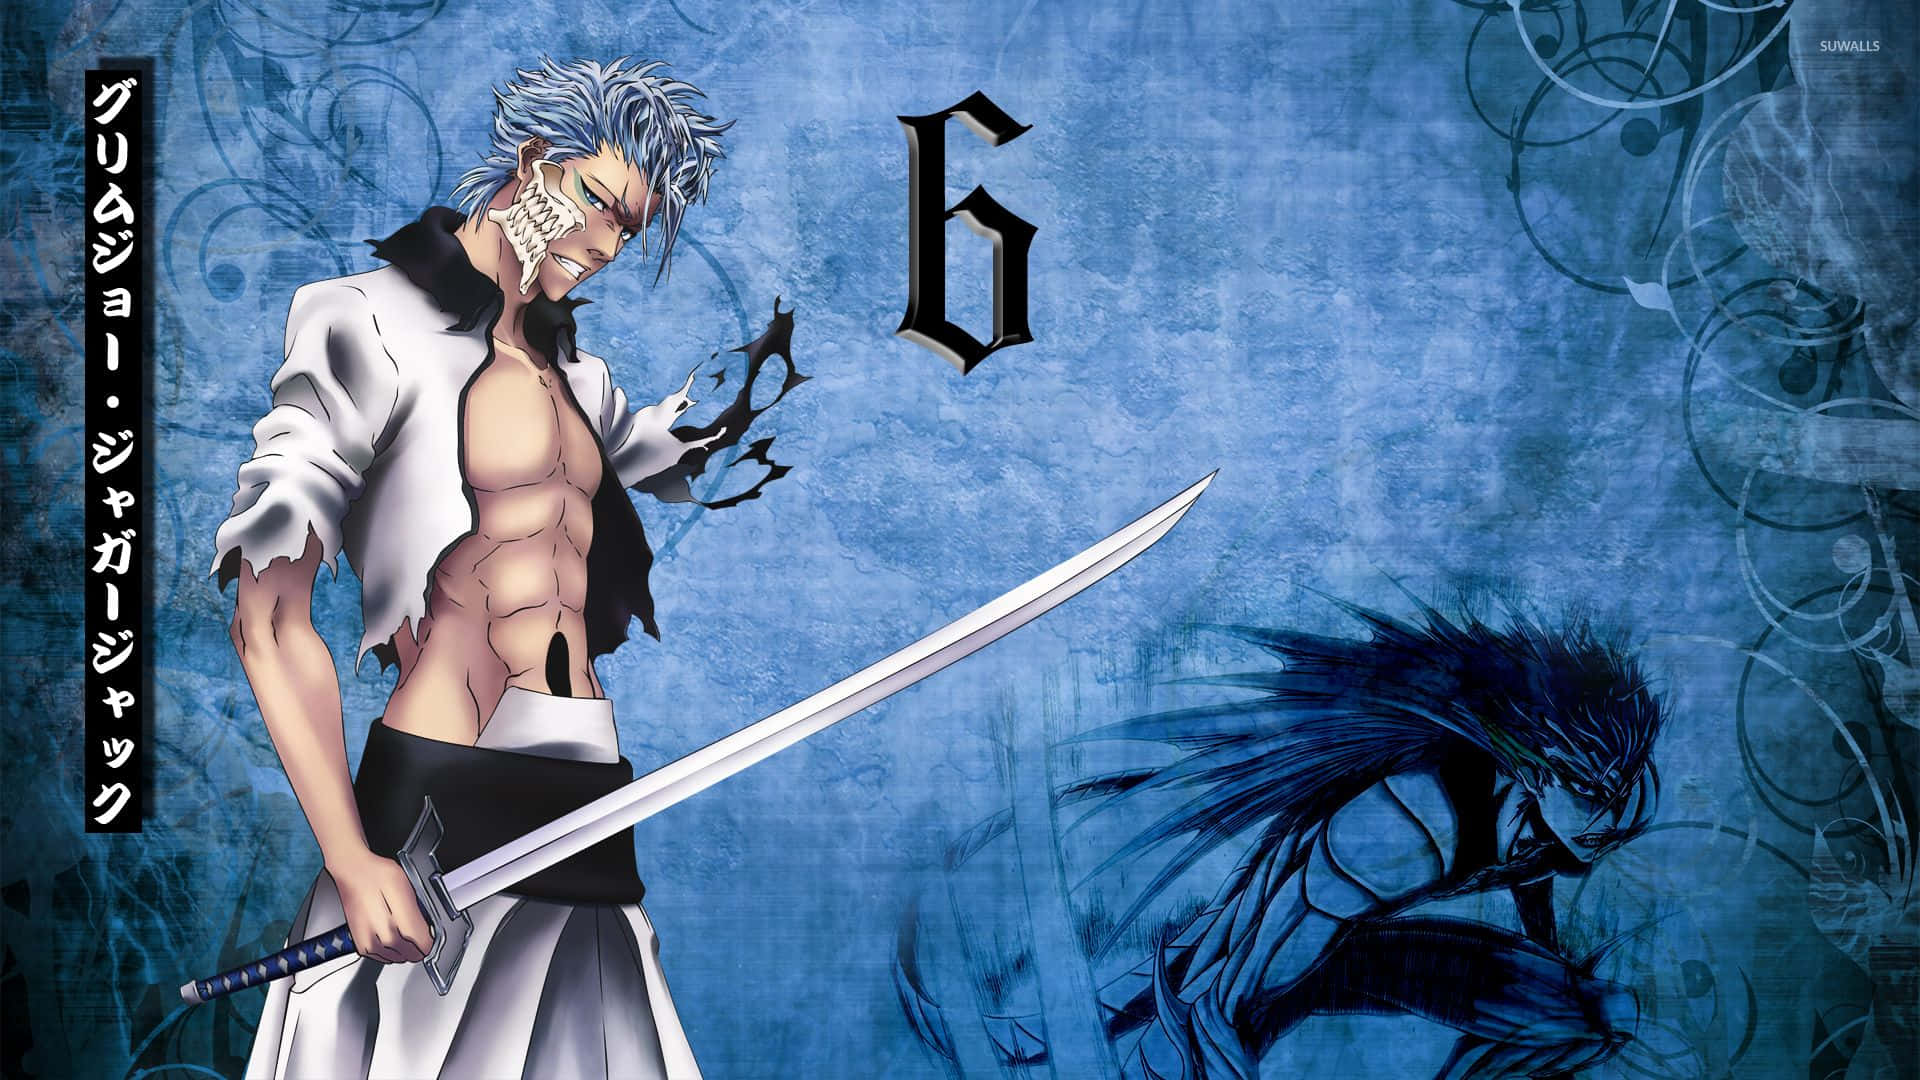 Toshiro Hitsugaya, captain of the Tenth Division, from the manga and anime series, Bleach Wallpaper